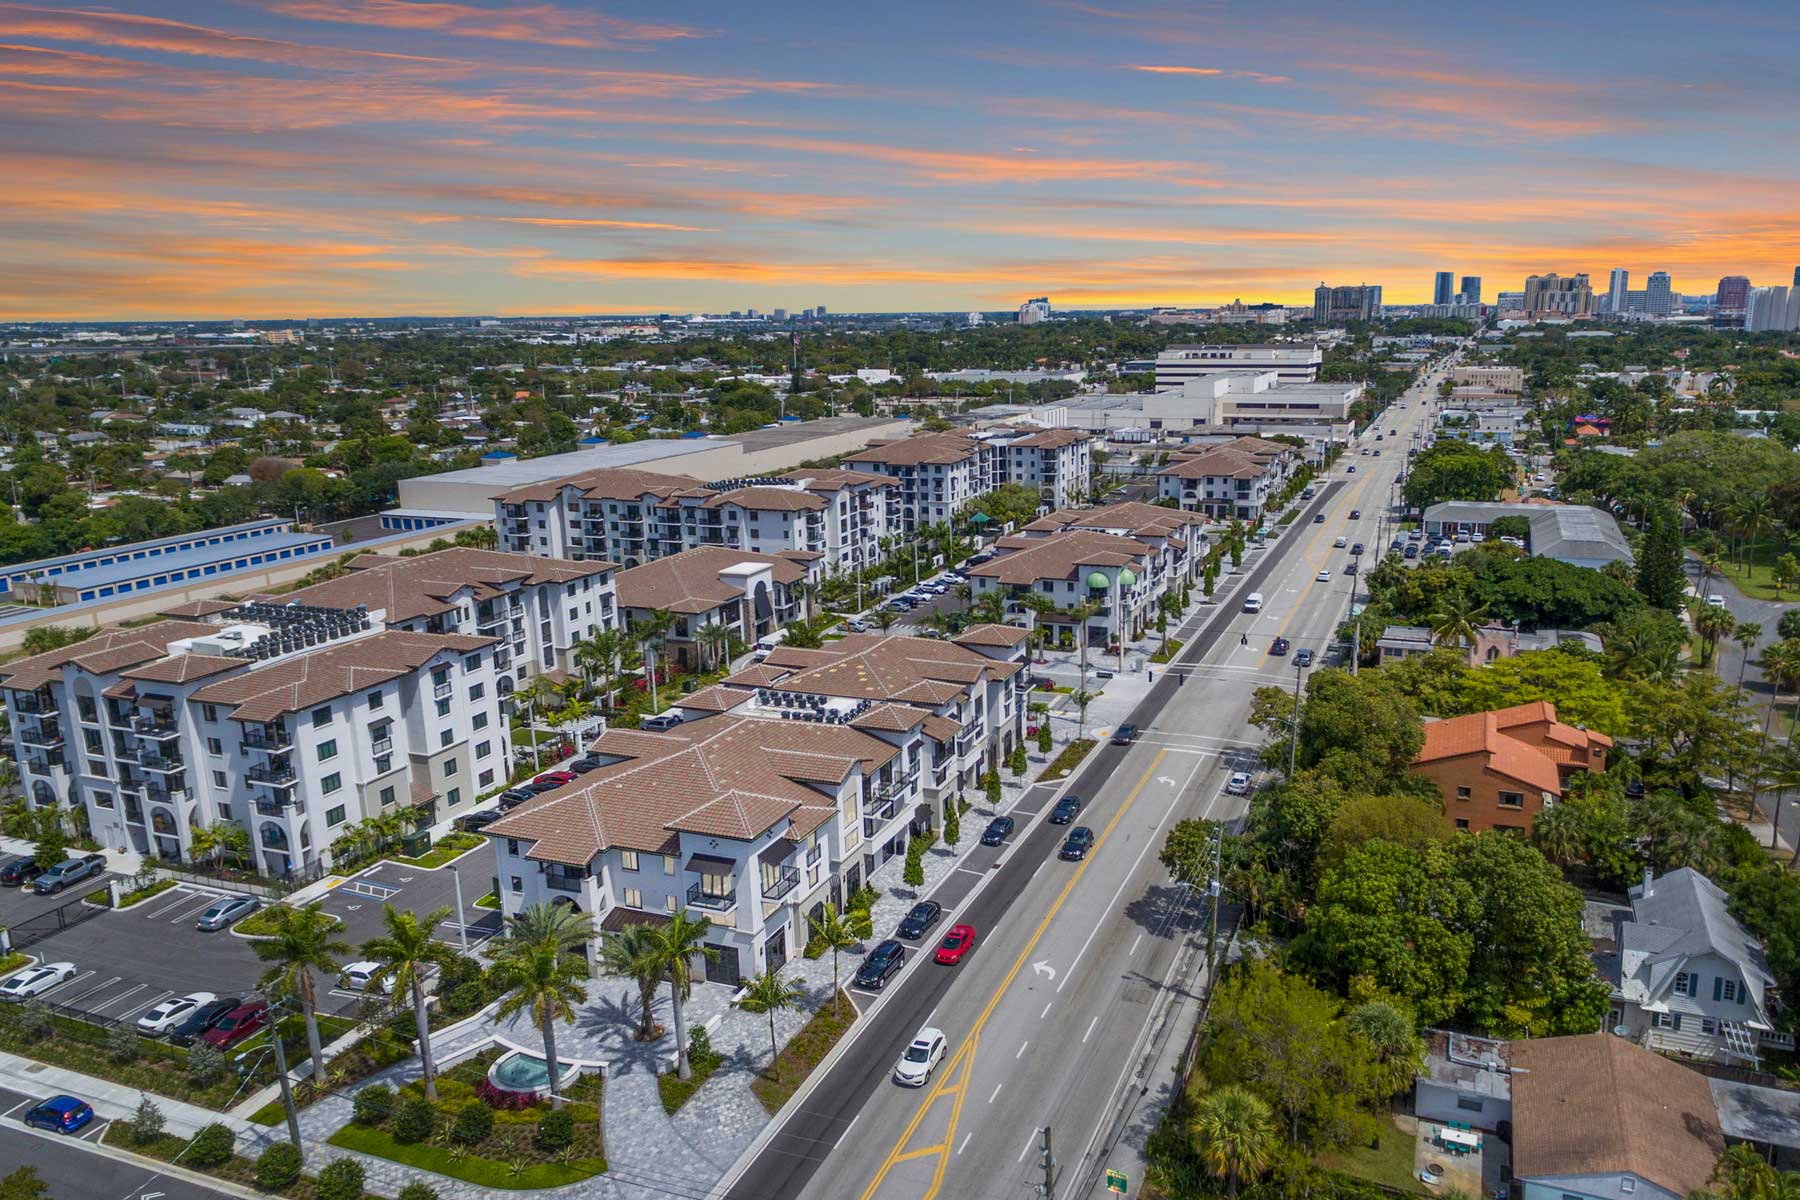 Drone shot of CasaMara property and WPB skyline